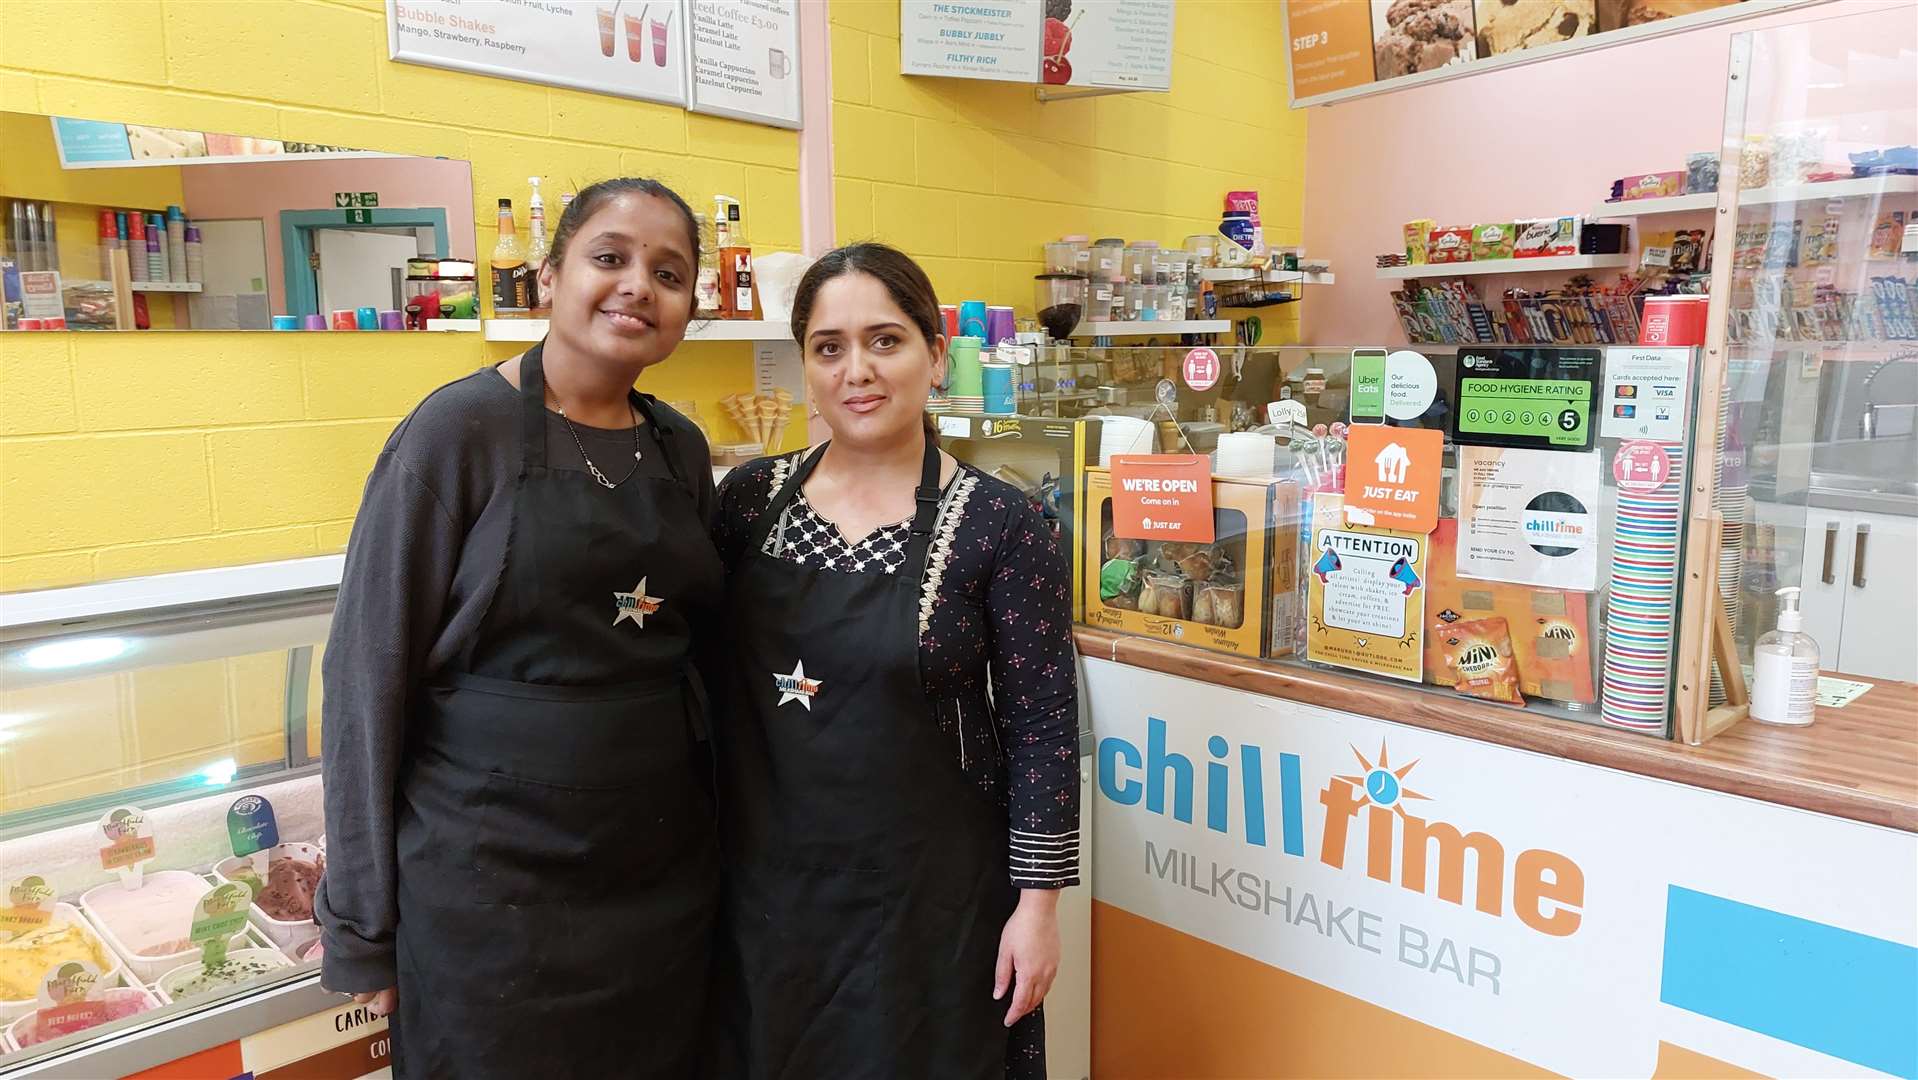 Chill Time worker Khyati Sharma, left, with owner Mariam Ali at their store in Ashford’s County Square